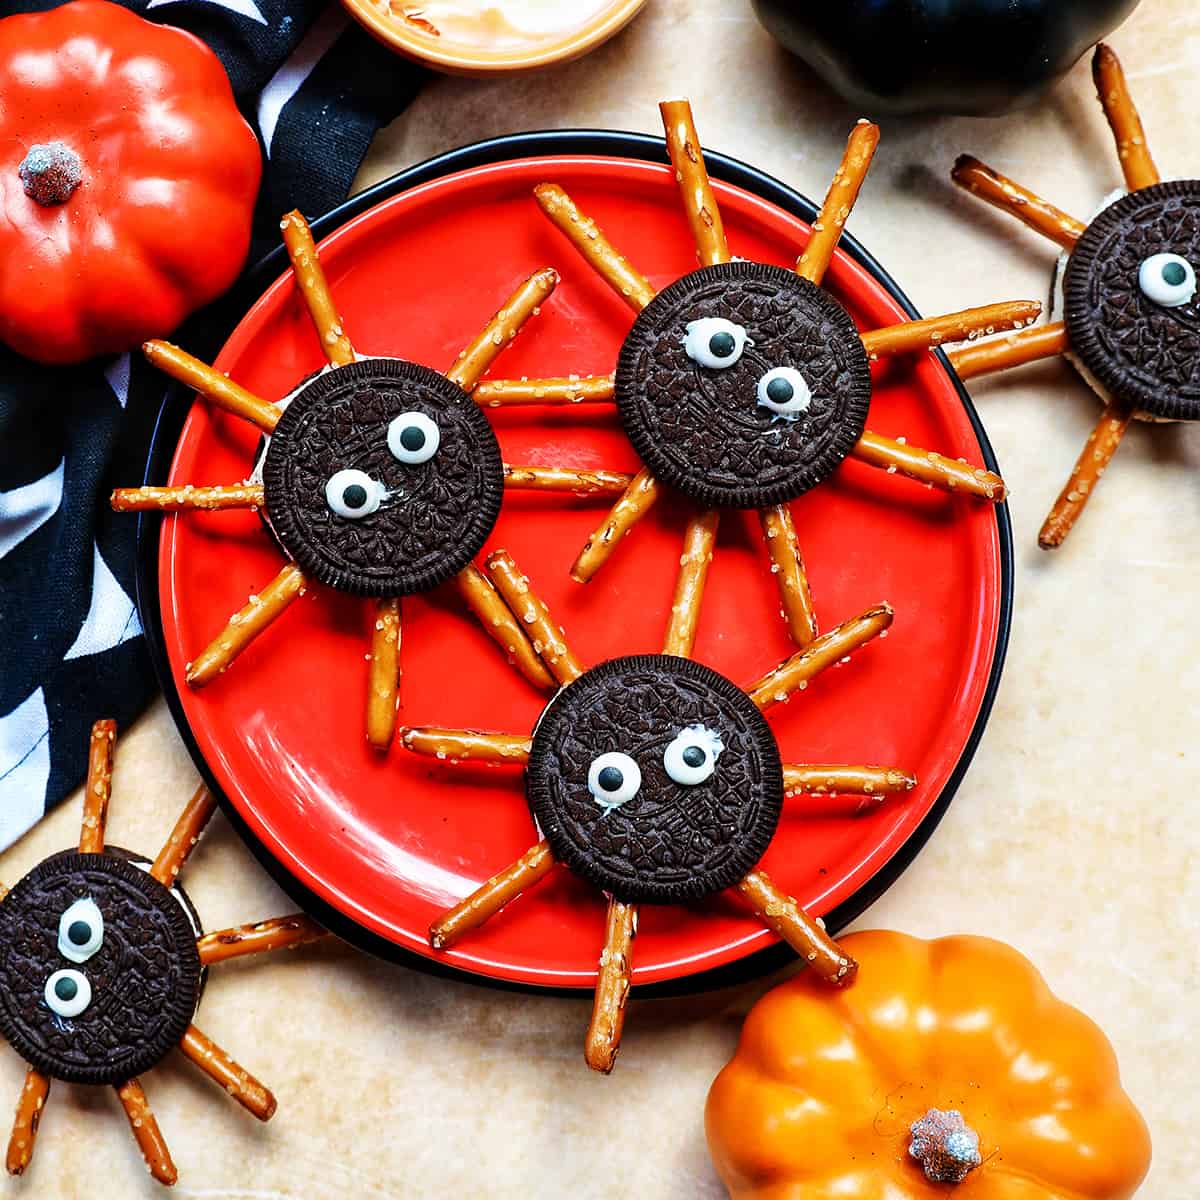 several Oreo Spider Cookies on an orange plate with Halloween decorations around it.